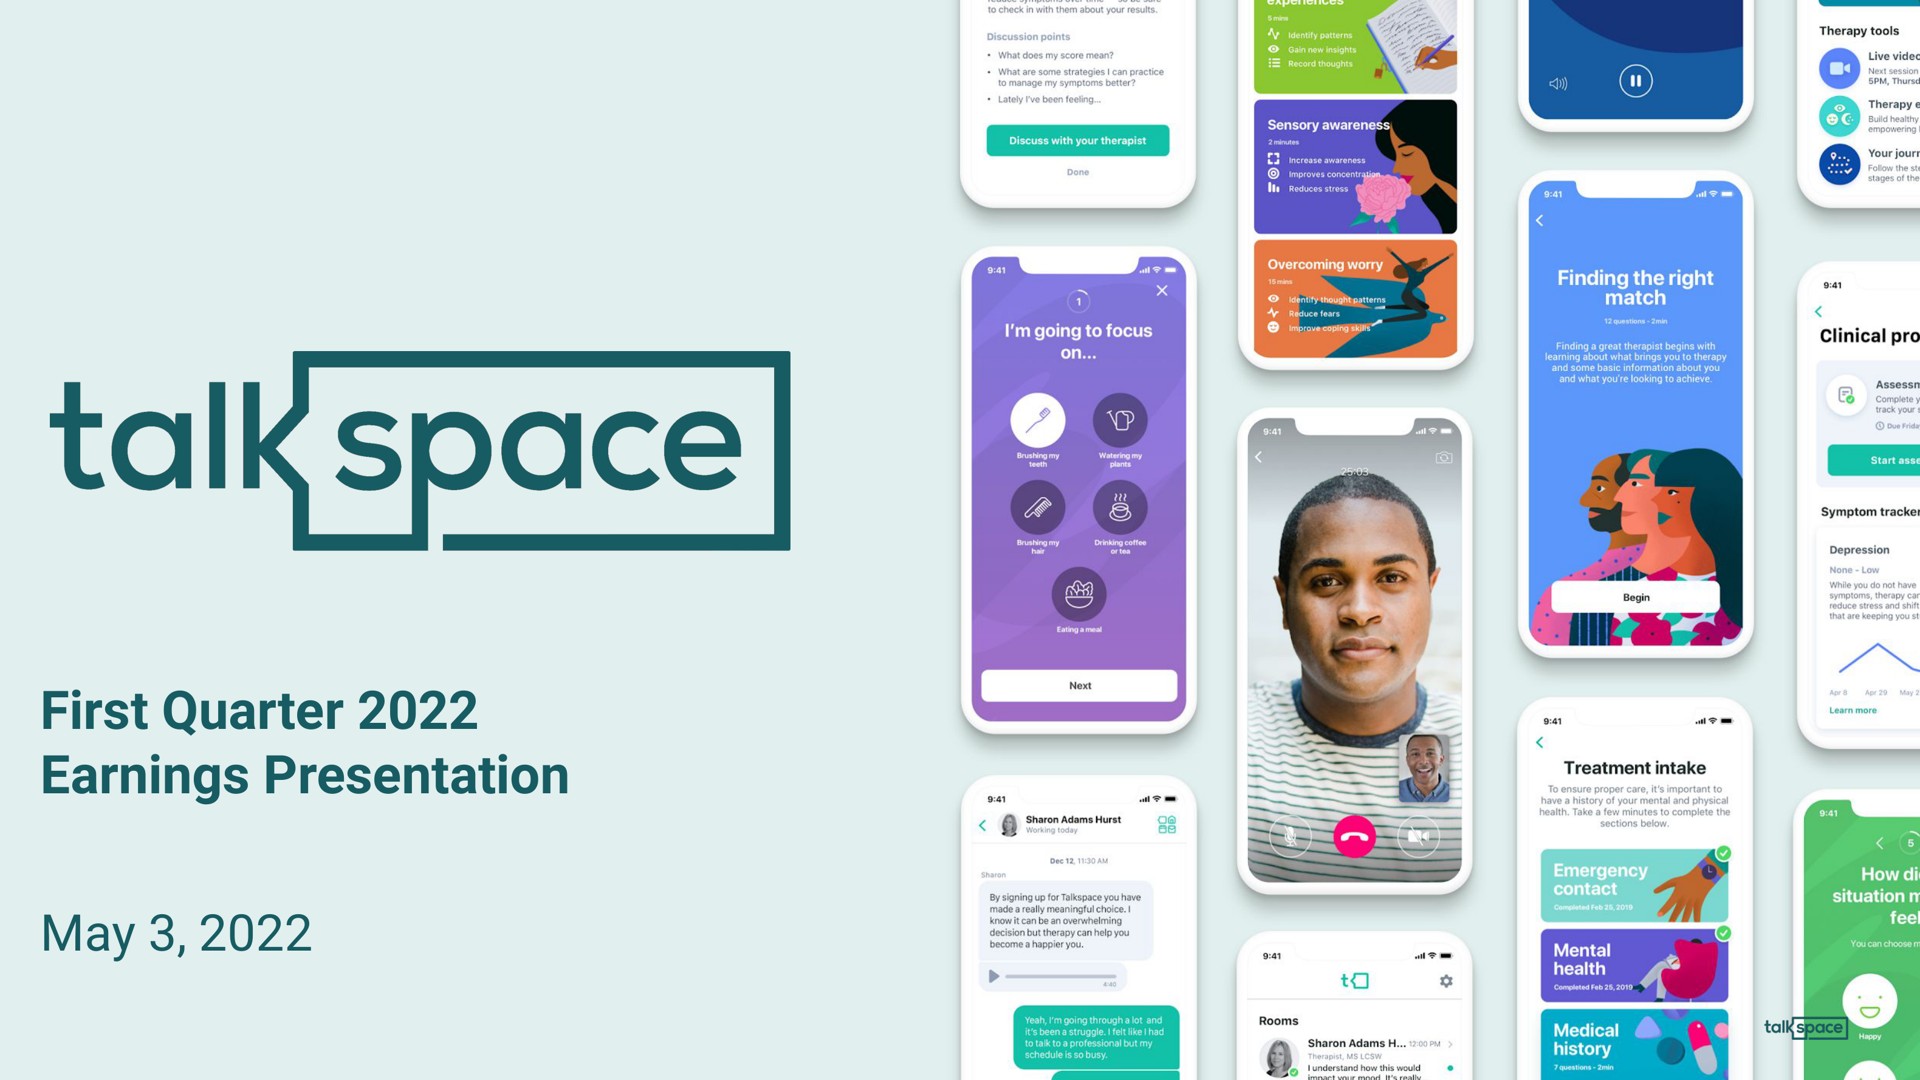 first quarter earnings presentation tal space may | Talkspace